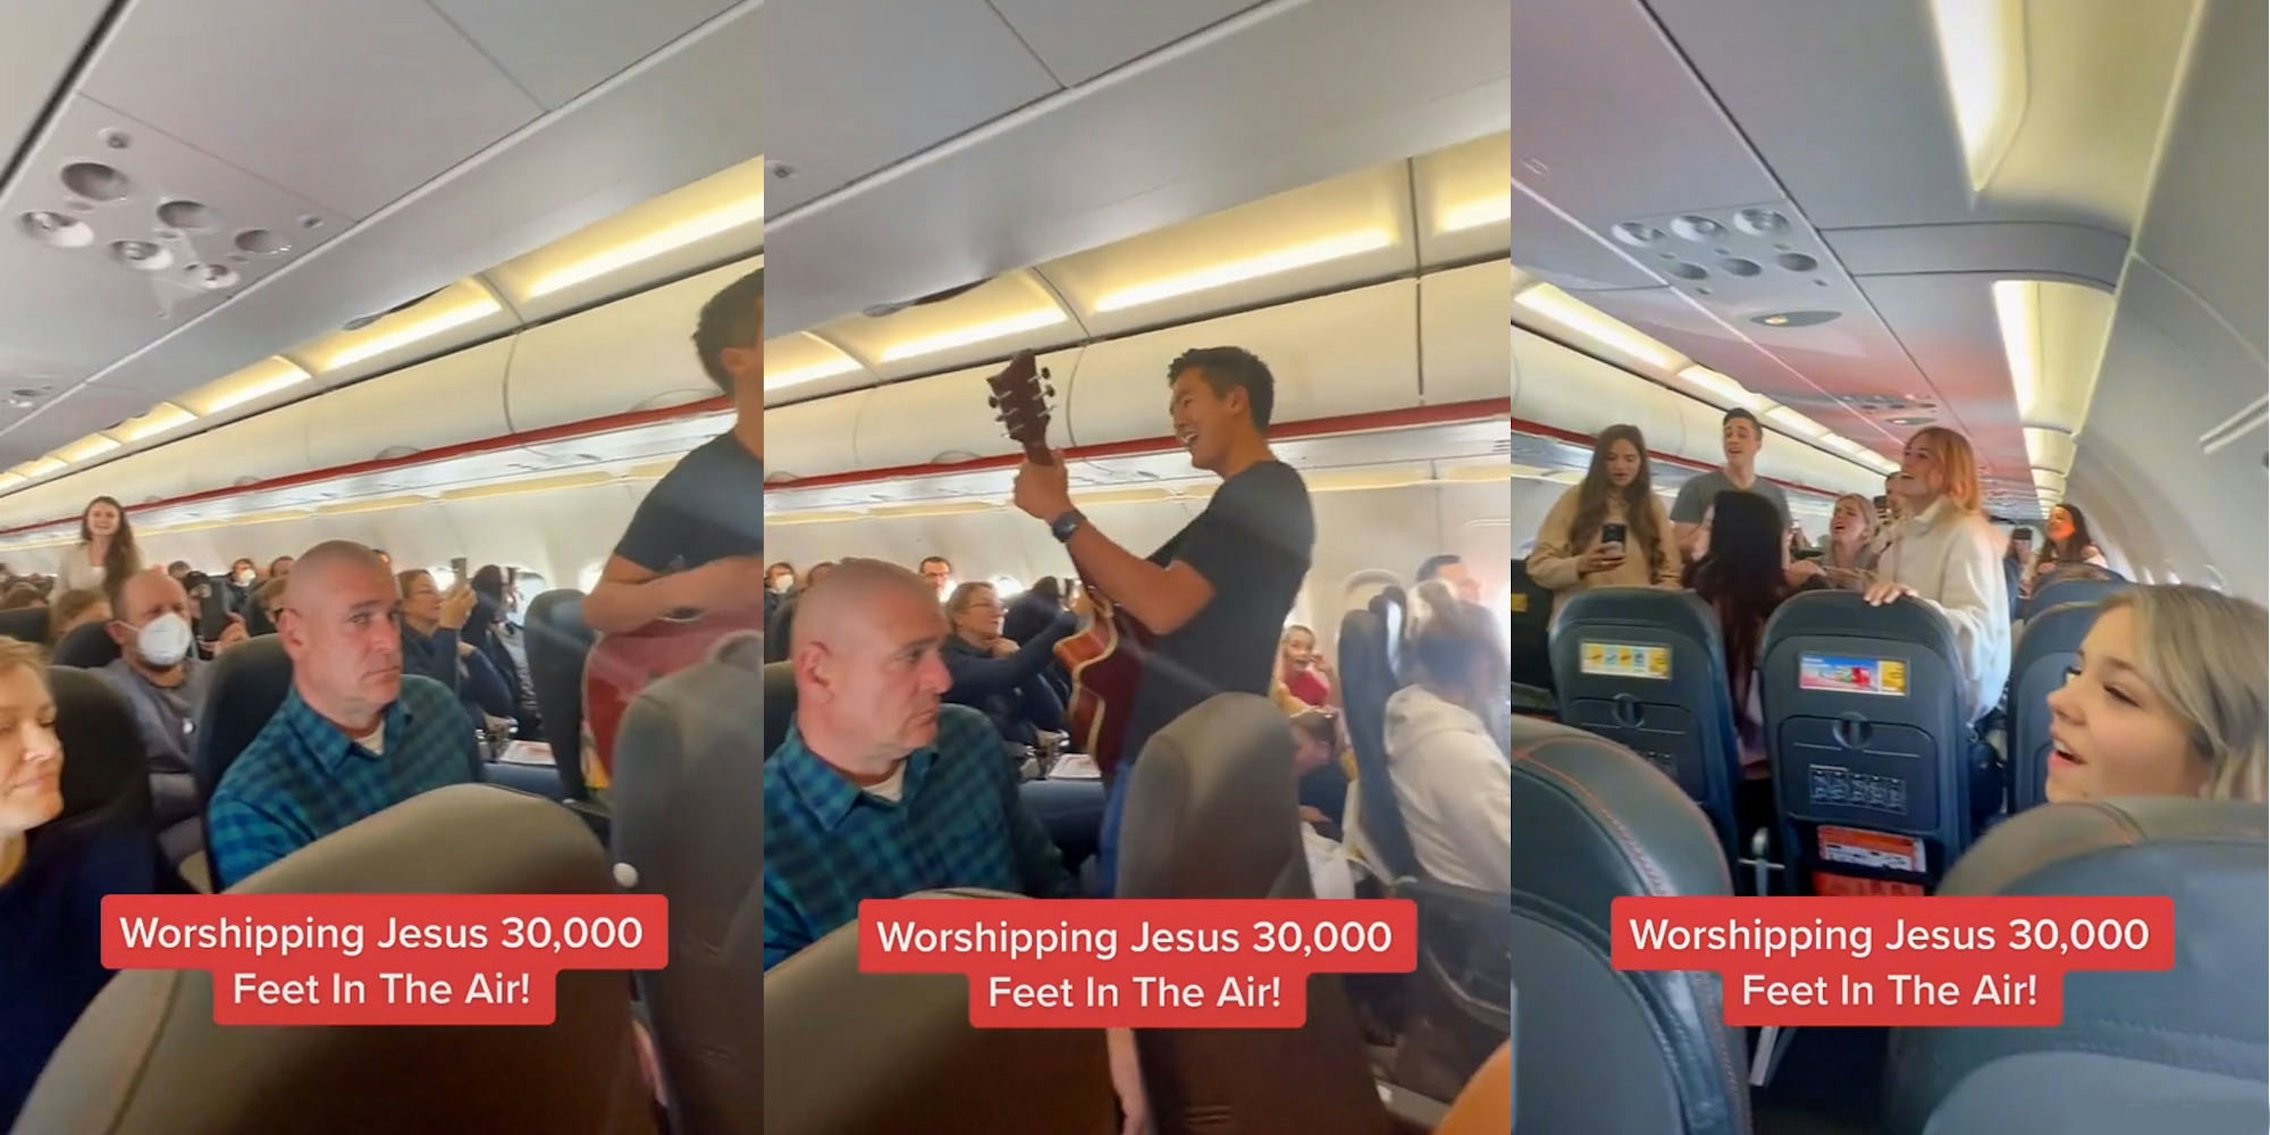 People on plane man holding guitar caption 'Worshipping Jesus 30,000 Feet In The Air' (l) Man singing and playing guitar on plane caption 'Worshipping Jesus 30,000 Feet In The Air!' (c) People standing on plane some recording caption 'Worshipping Jesus 30,000 Feet In The Air!' (r)